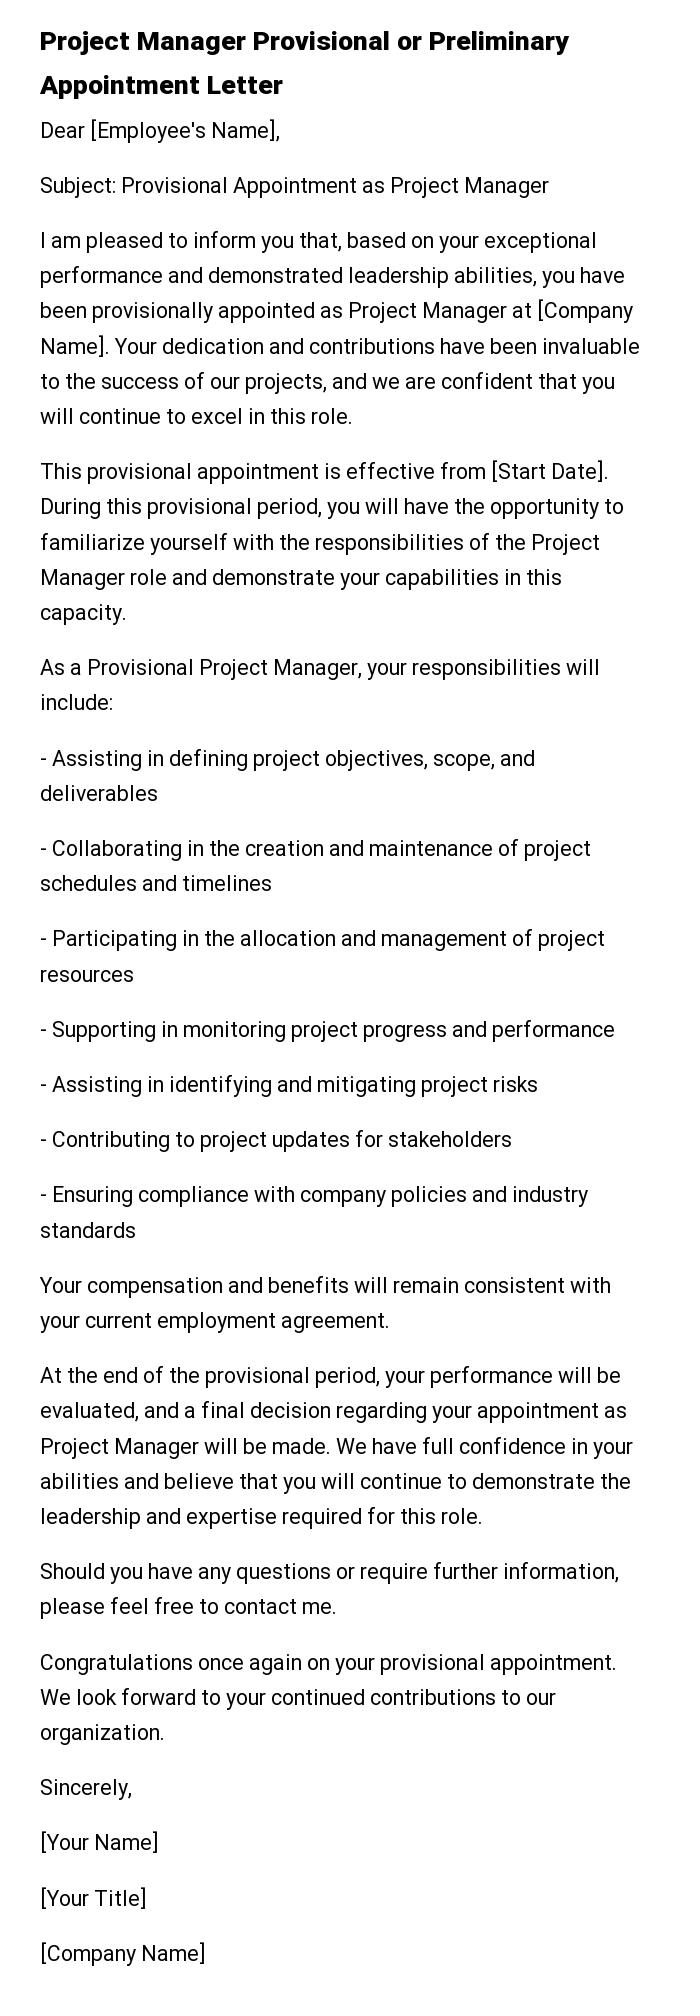 Project Manager Provisional or Preliminary Appointment Letter